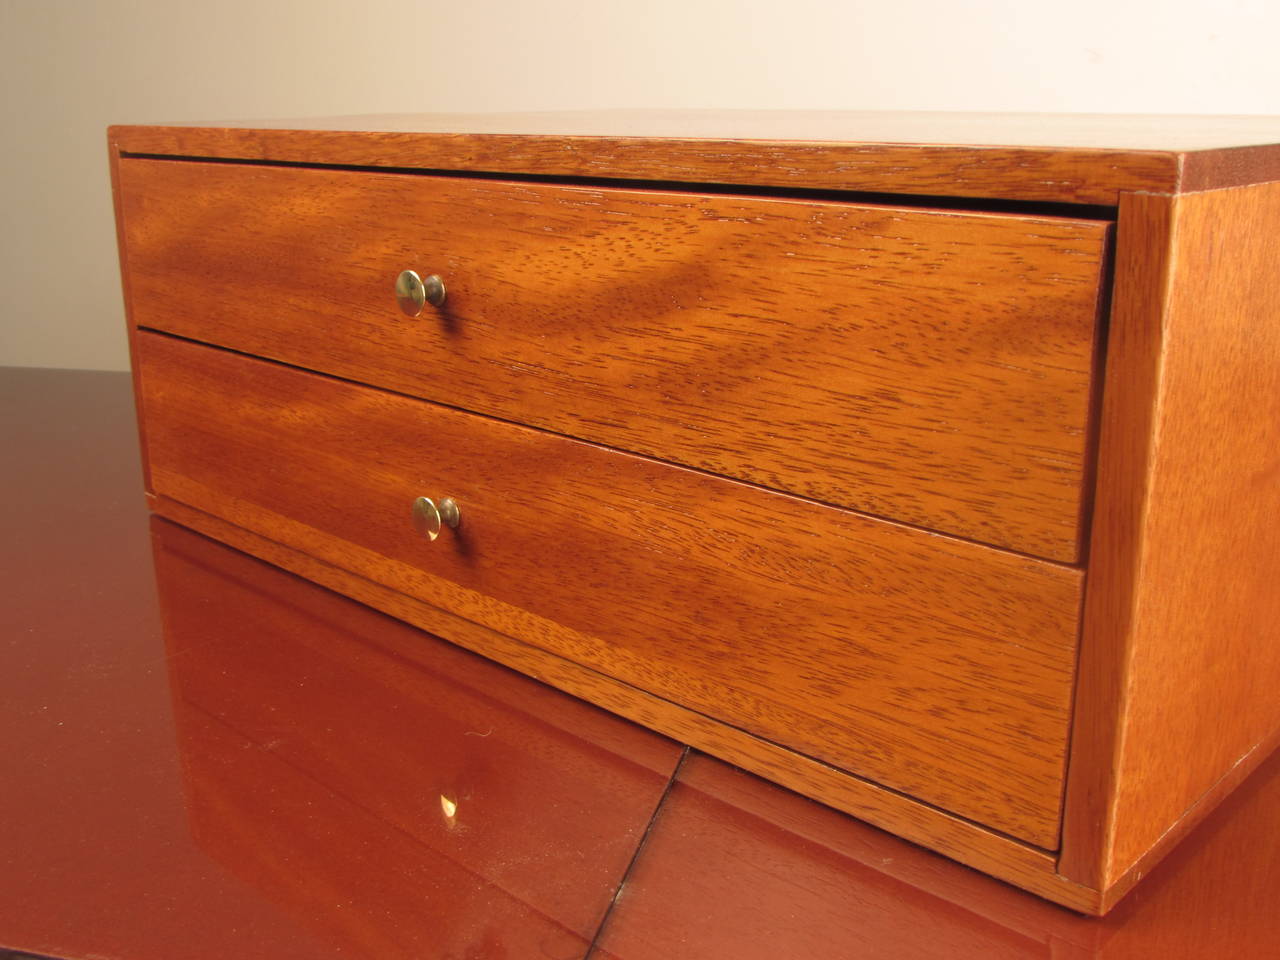 Mid-20th Century Lovely Dresser or Jewelry Box in the style of Paul McCobb